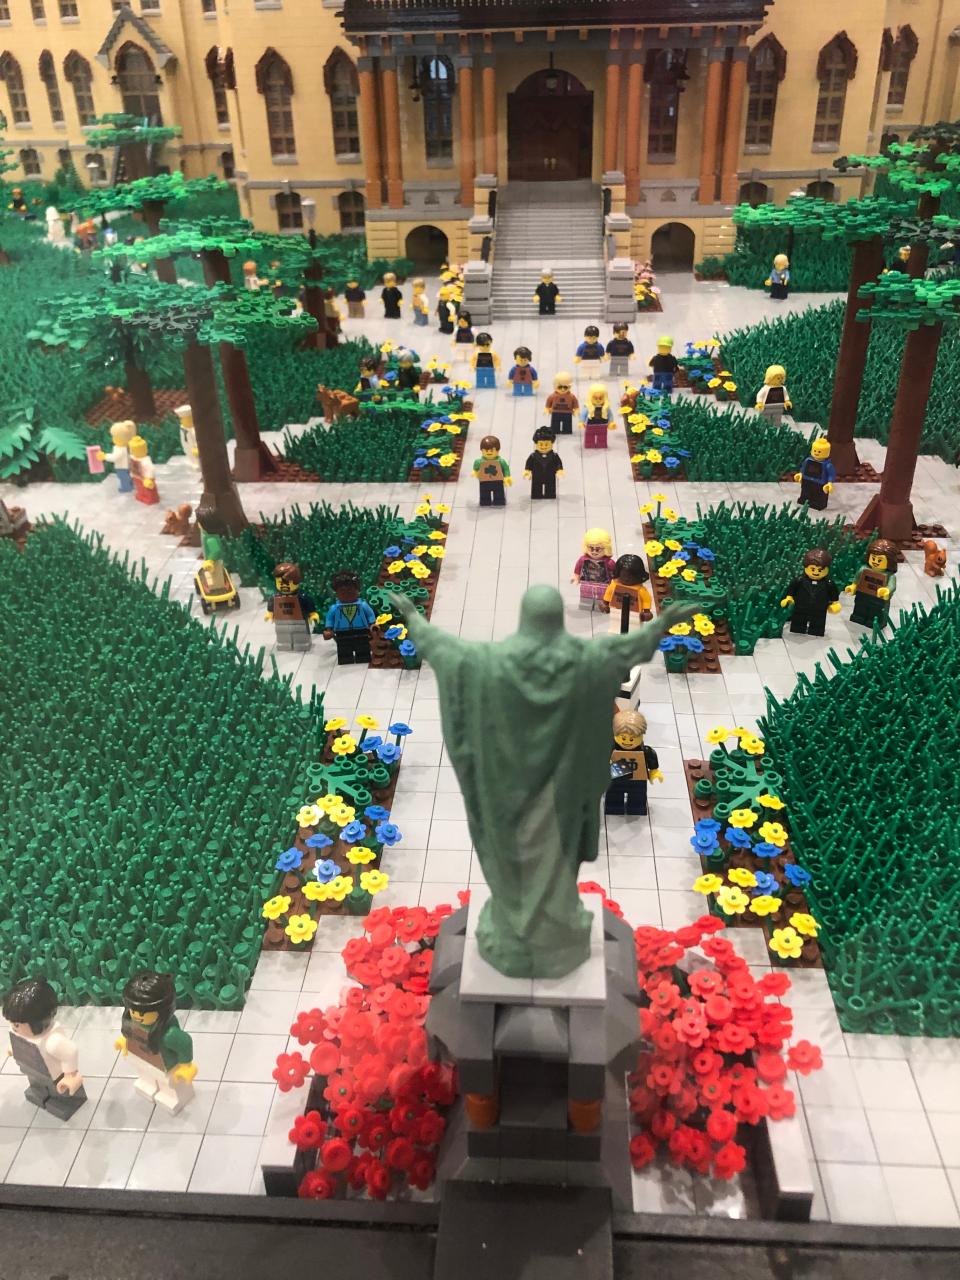 This view looks down on the quad near the University of Notre Dame's Administration Building made from 300,000 Lego bricks. A miniature of the university's president, the Rev. John Jenkins, stands on the steps.